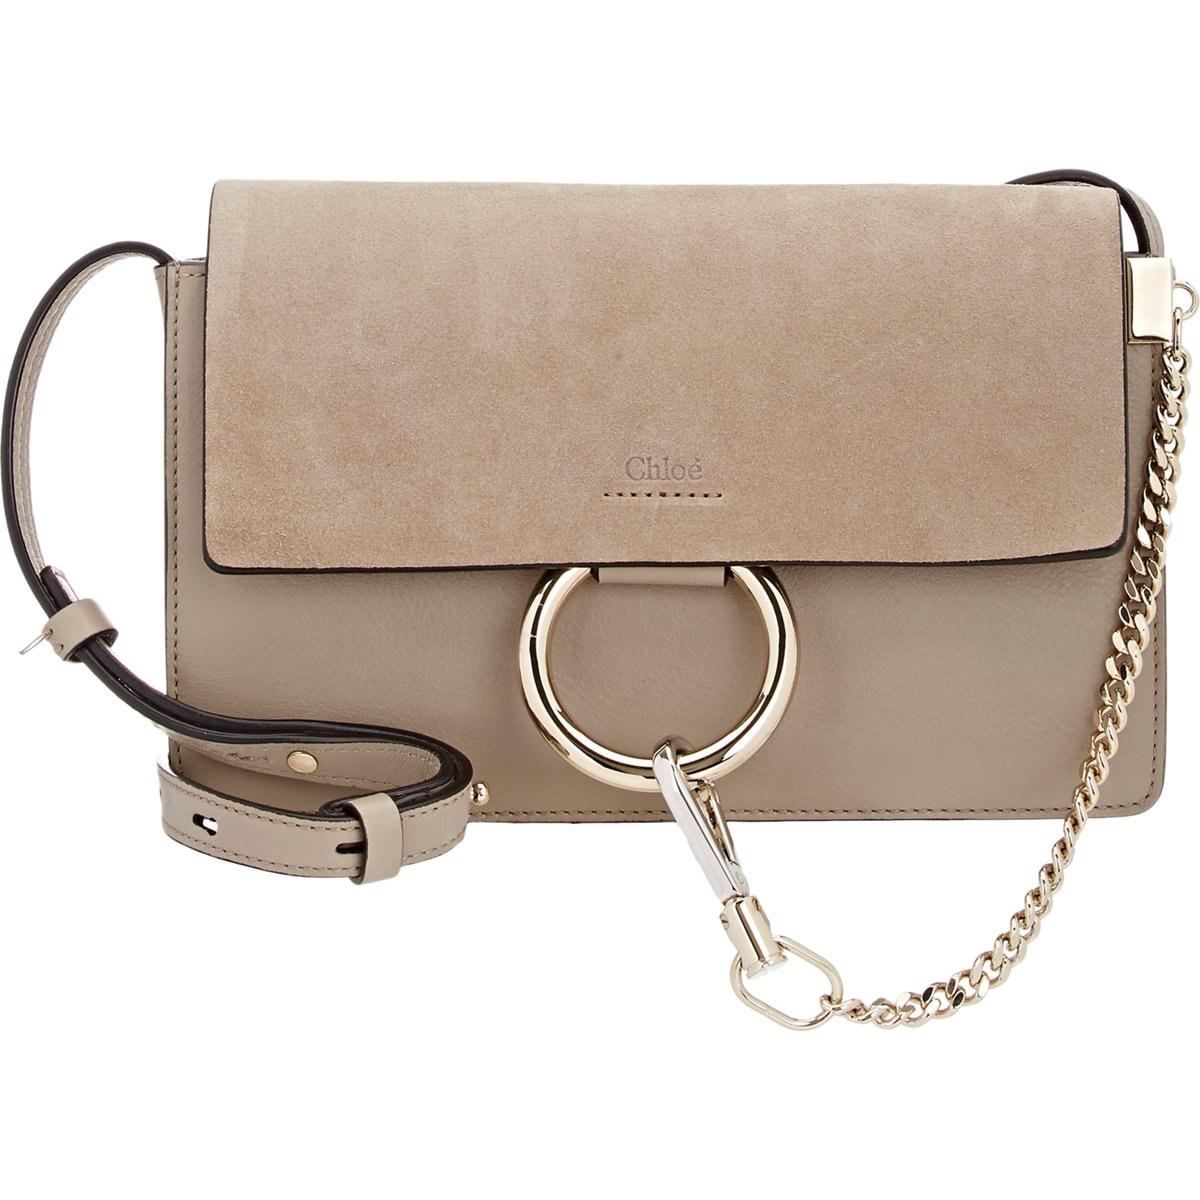 Chloé Faye Small Leather Shoulder Bag in Grey (Gray) - Lyst